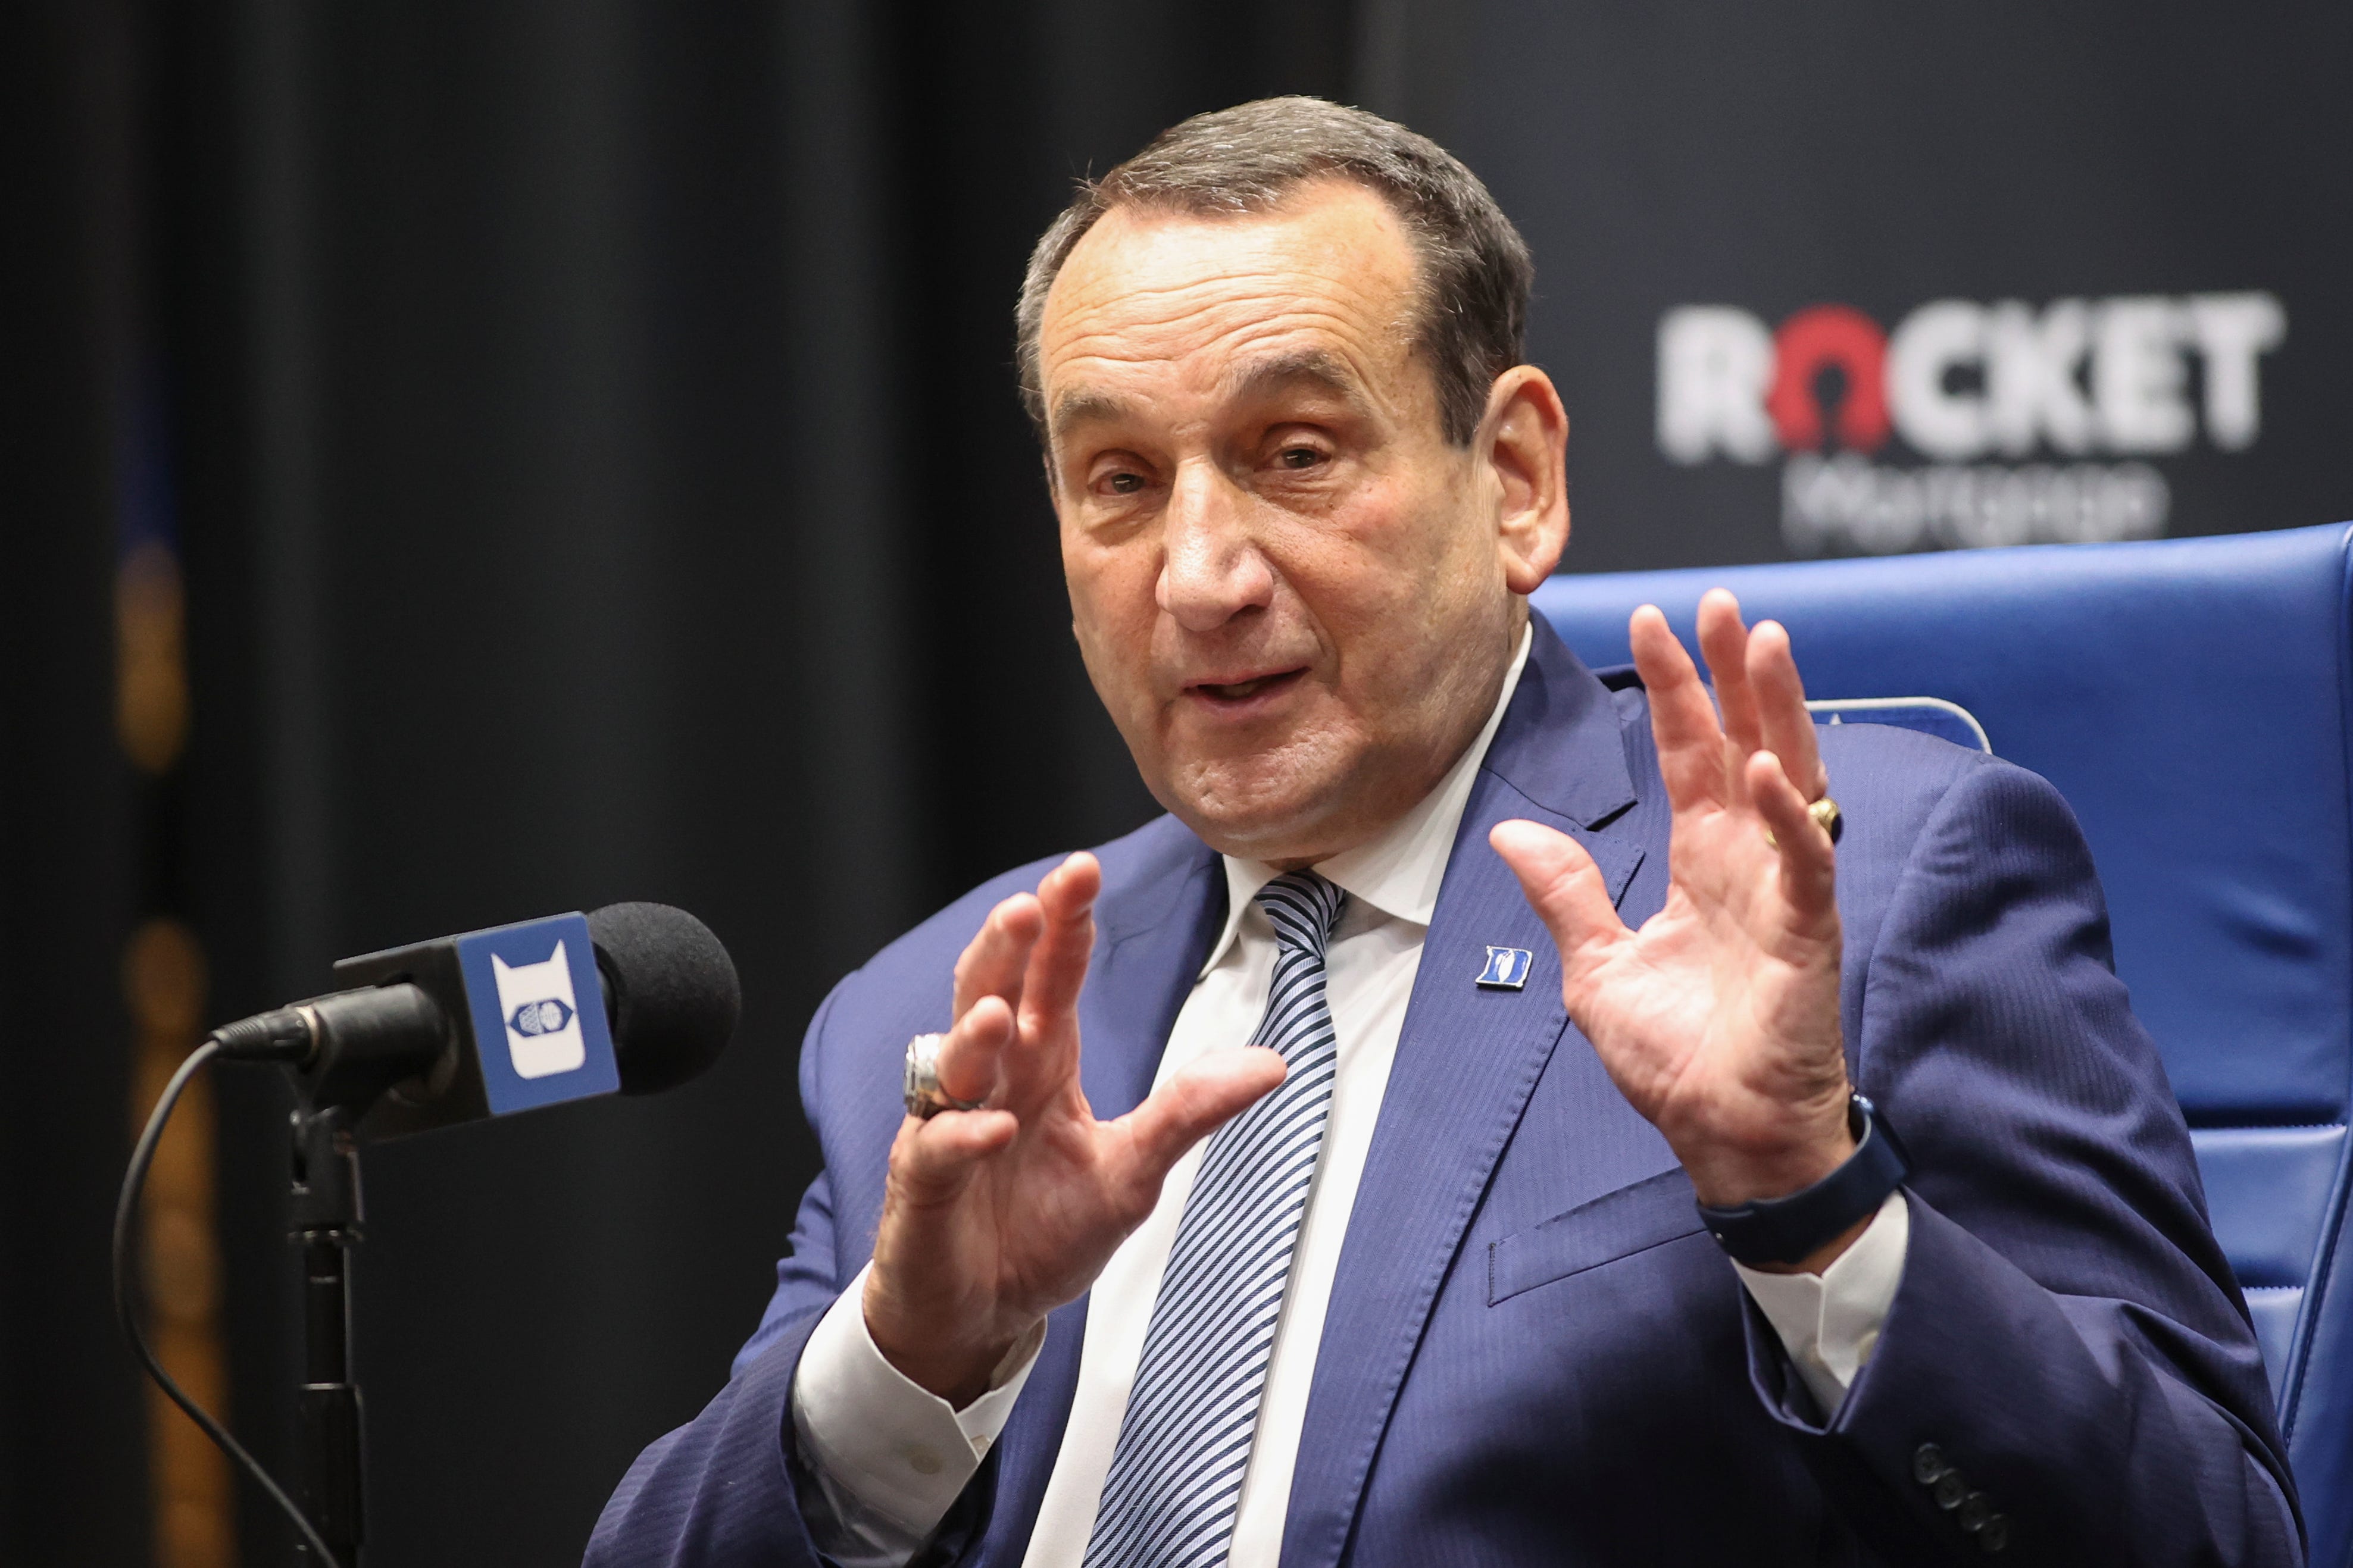 Coach K says decision to step down came after years of contemplation